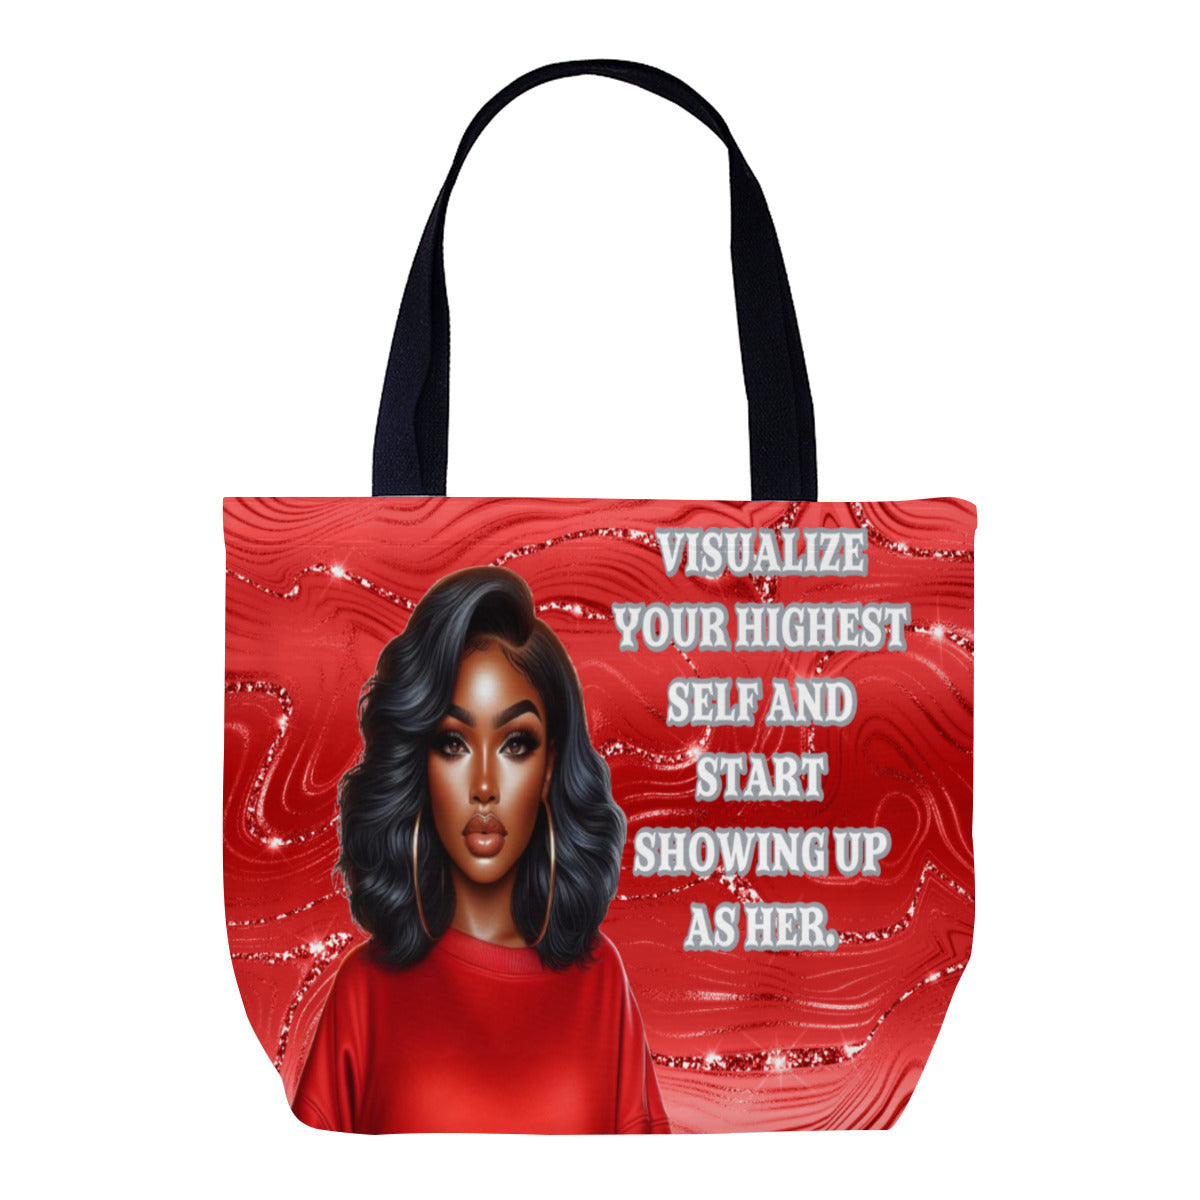 "Visualize Your Highest Self Tote Bag: Inspire and Empower on the Go!", Empowerment Tote Bag, Girl Boss,